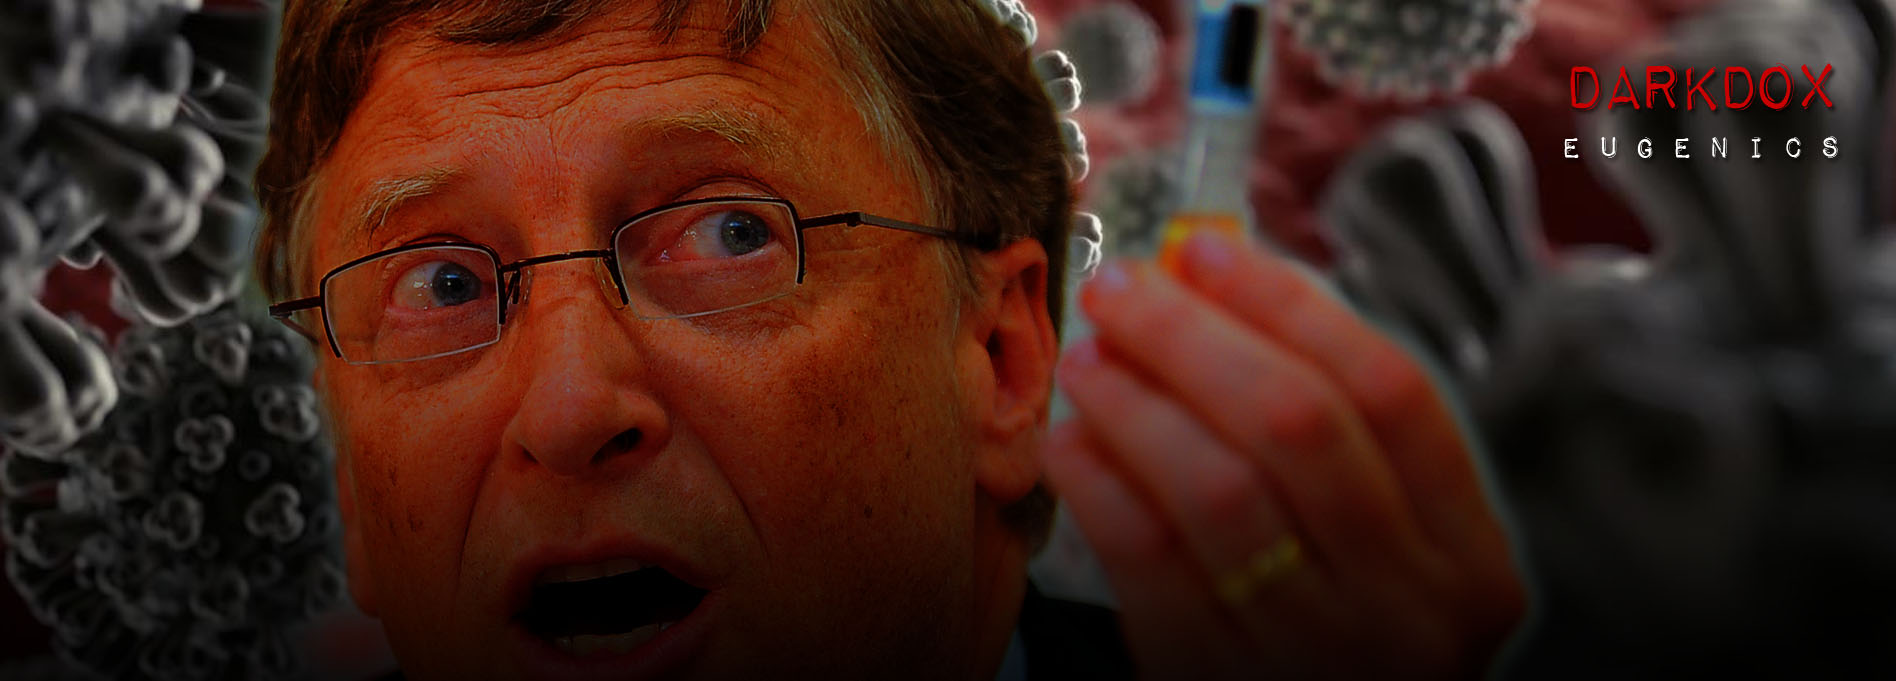 The 2011 article on Bill Gates: Depopulation through forced vaccination